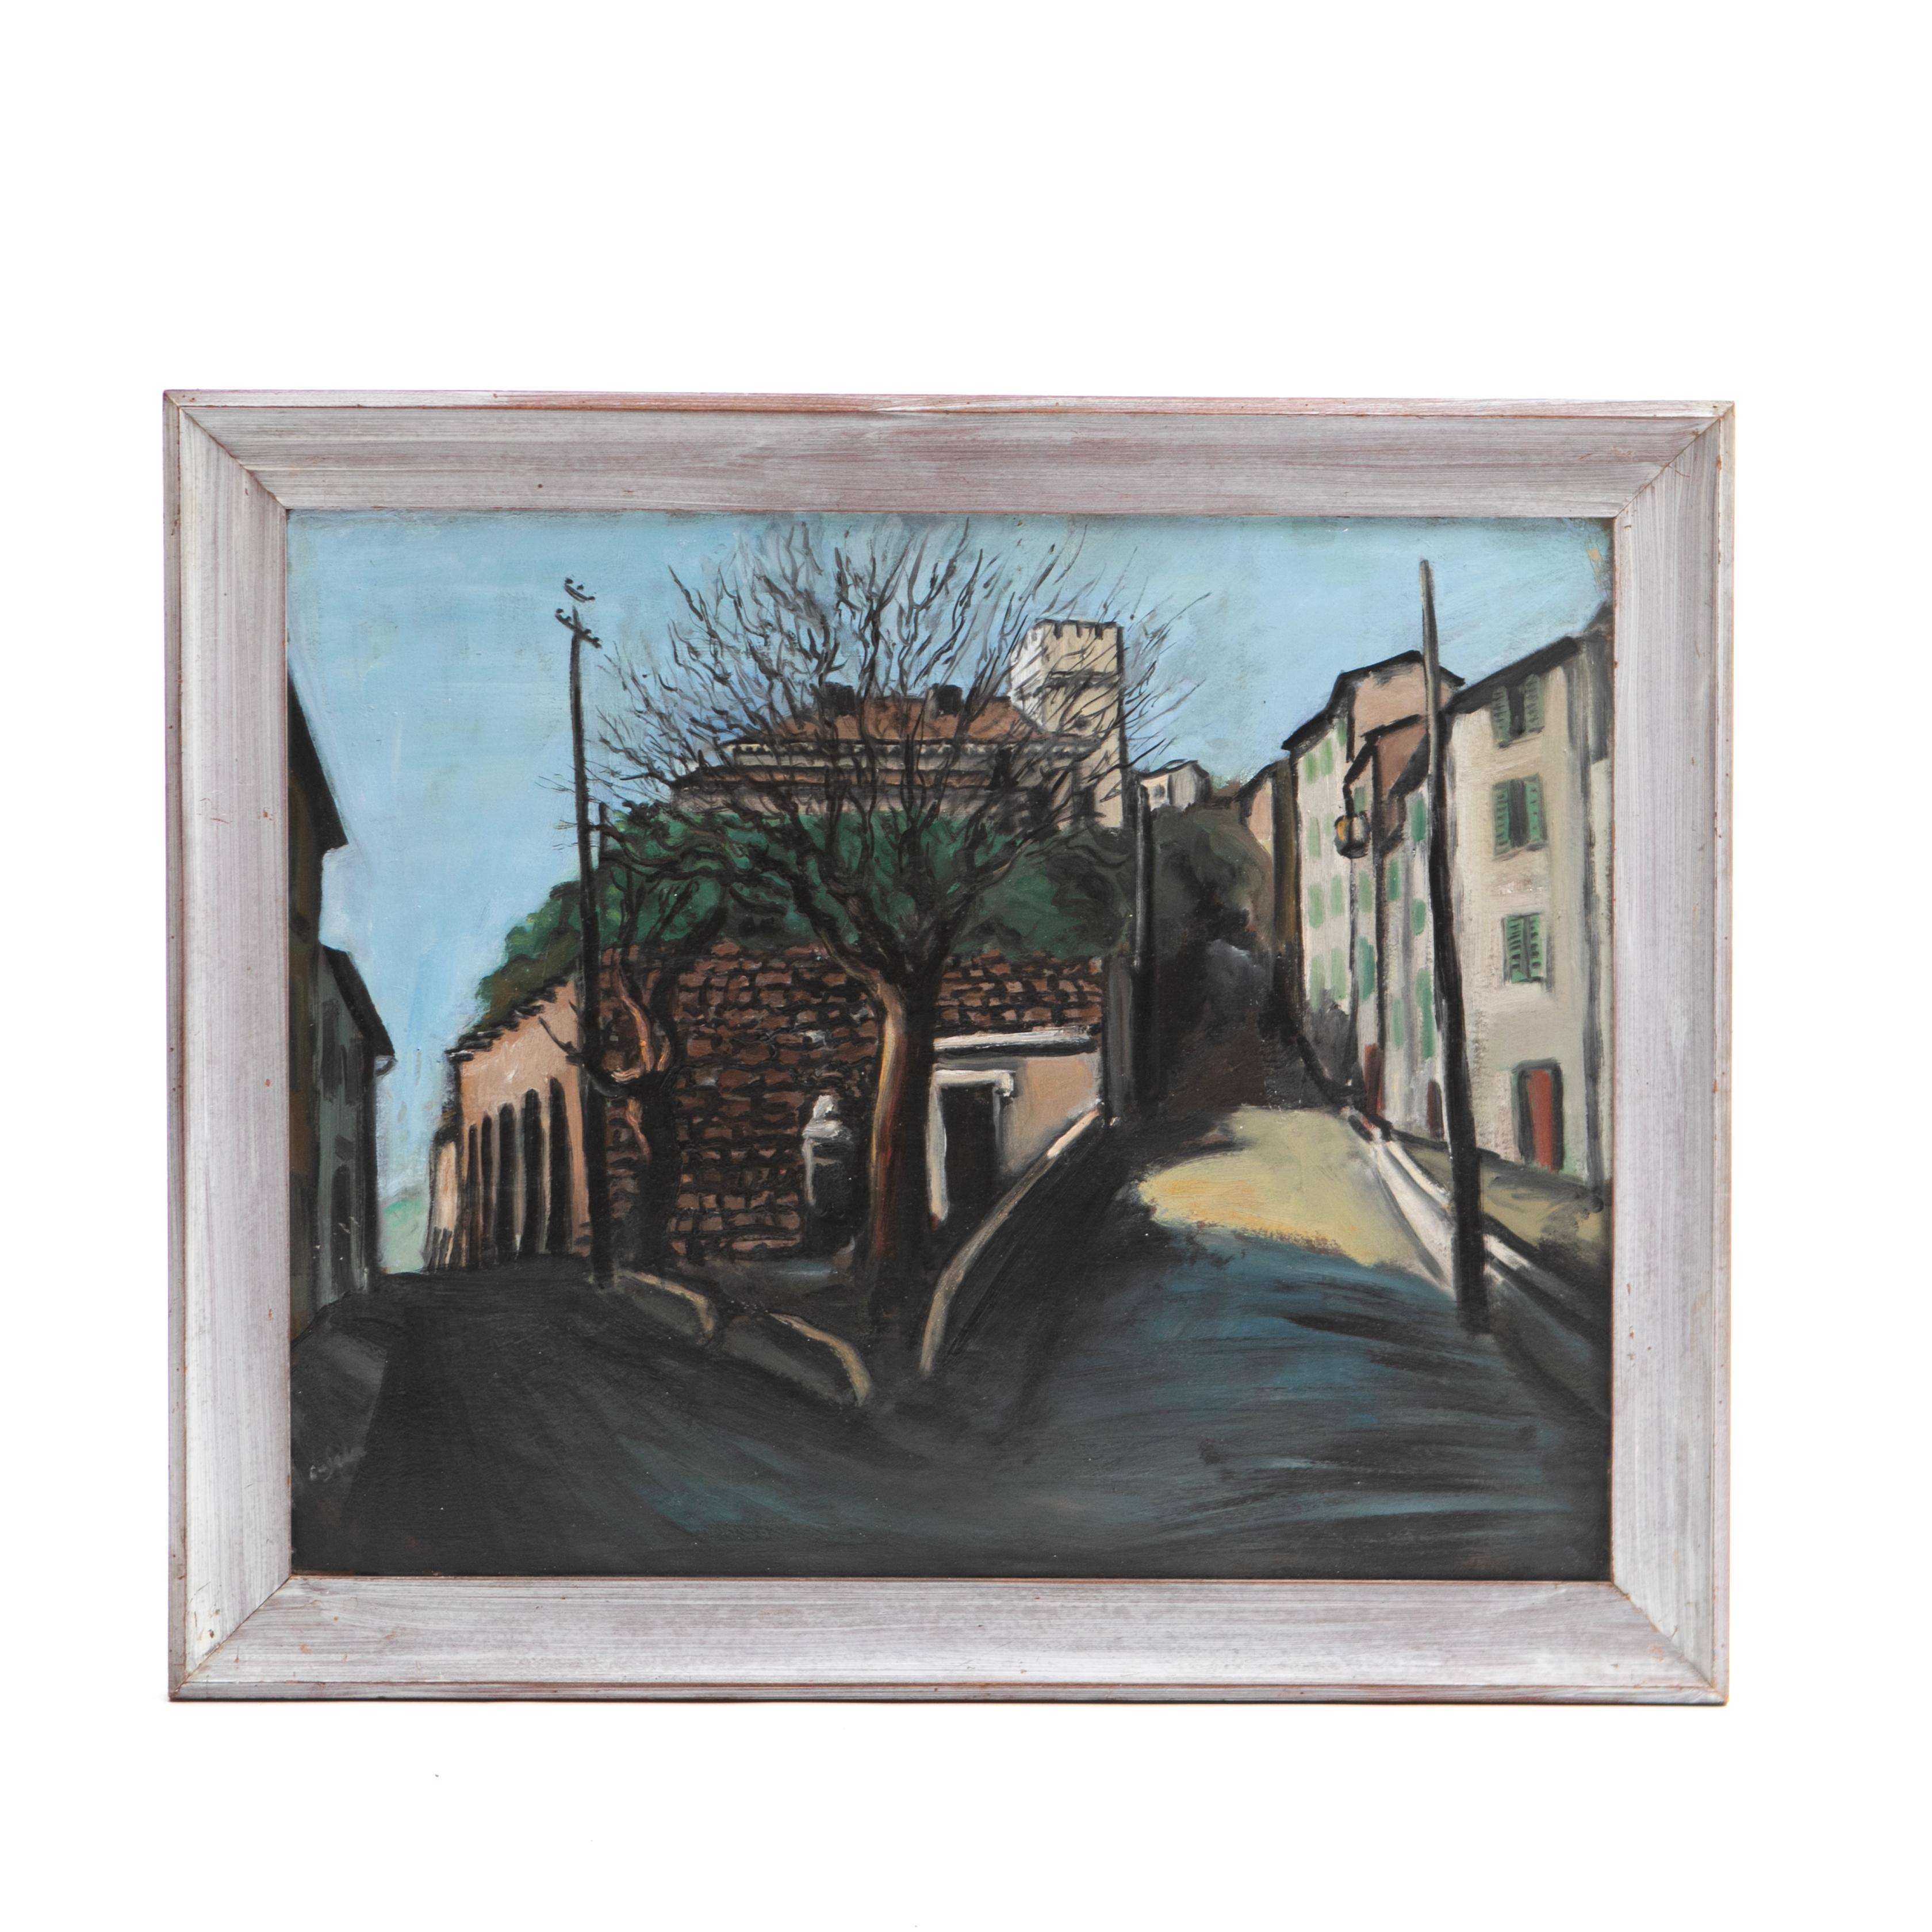 Eugène de Sala, 1899-1989

Experience the charm of Montmartre with this painting created by Eugène de Sala during his stay in Paris.
This unique artwork is painted with oil colors on cardboard and is beautifully framed in a gray wooden frame from